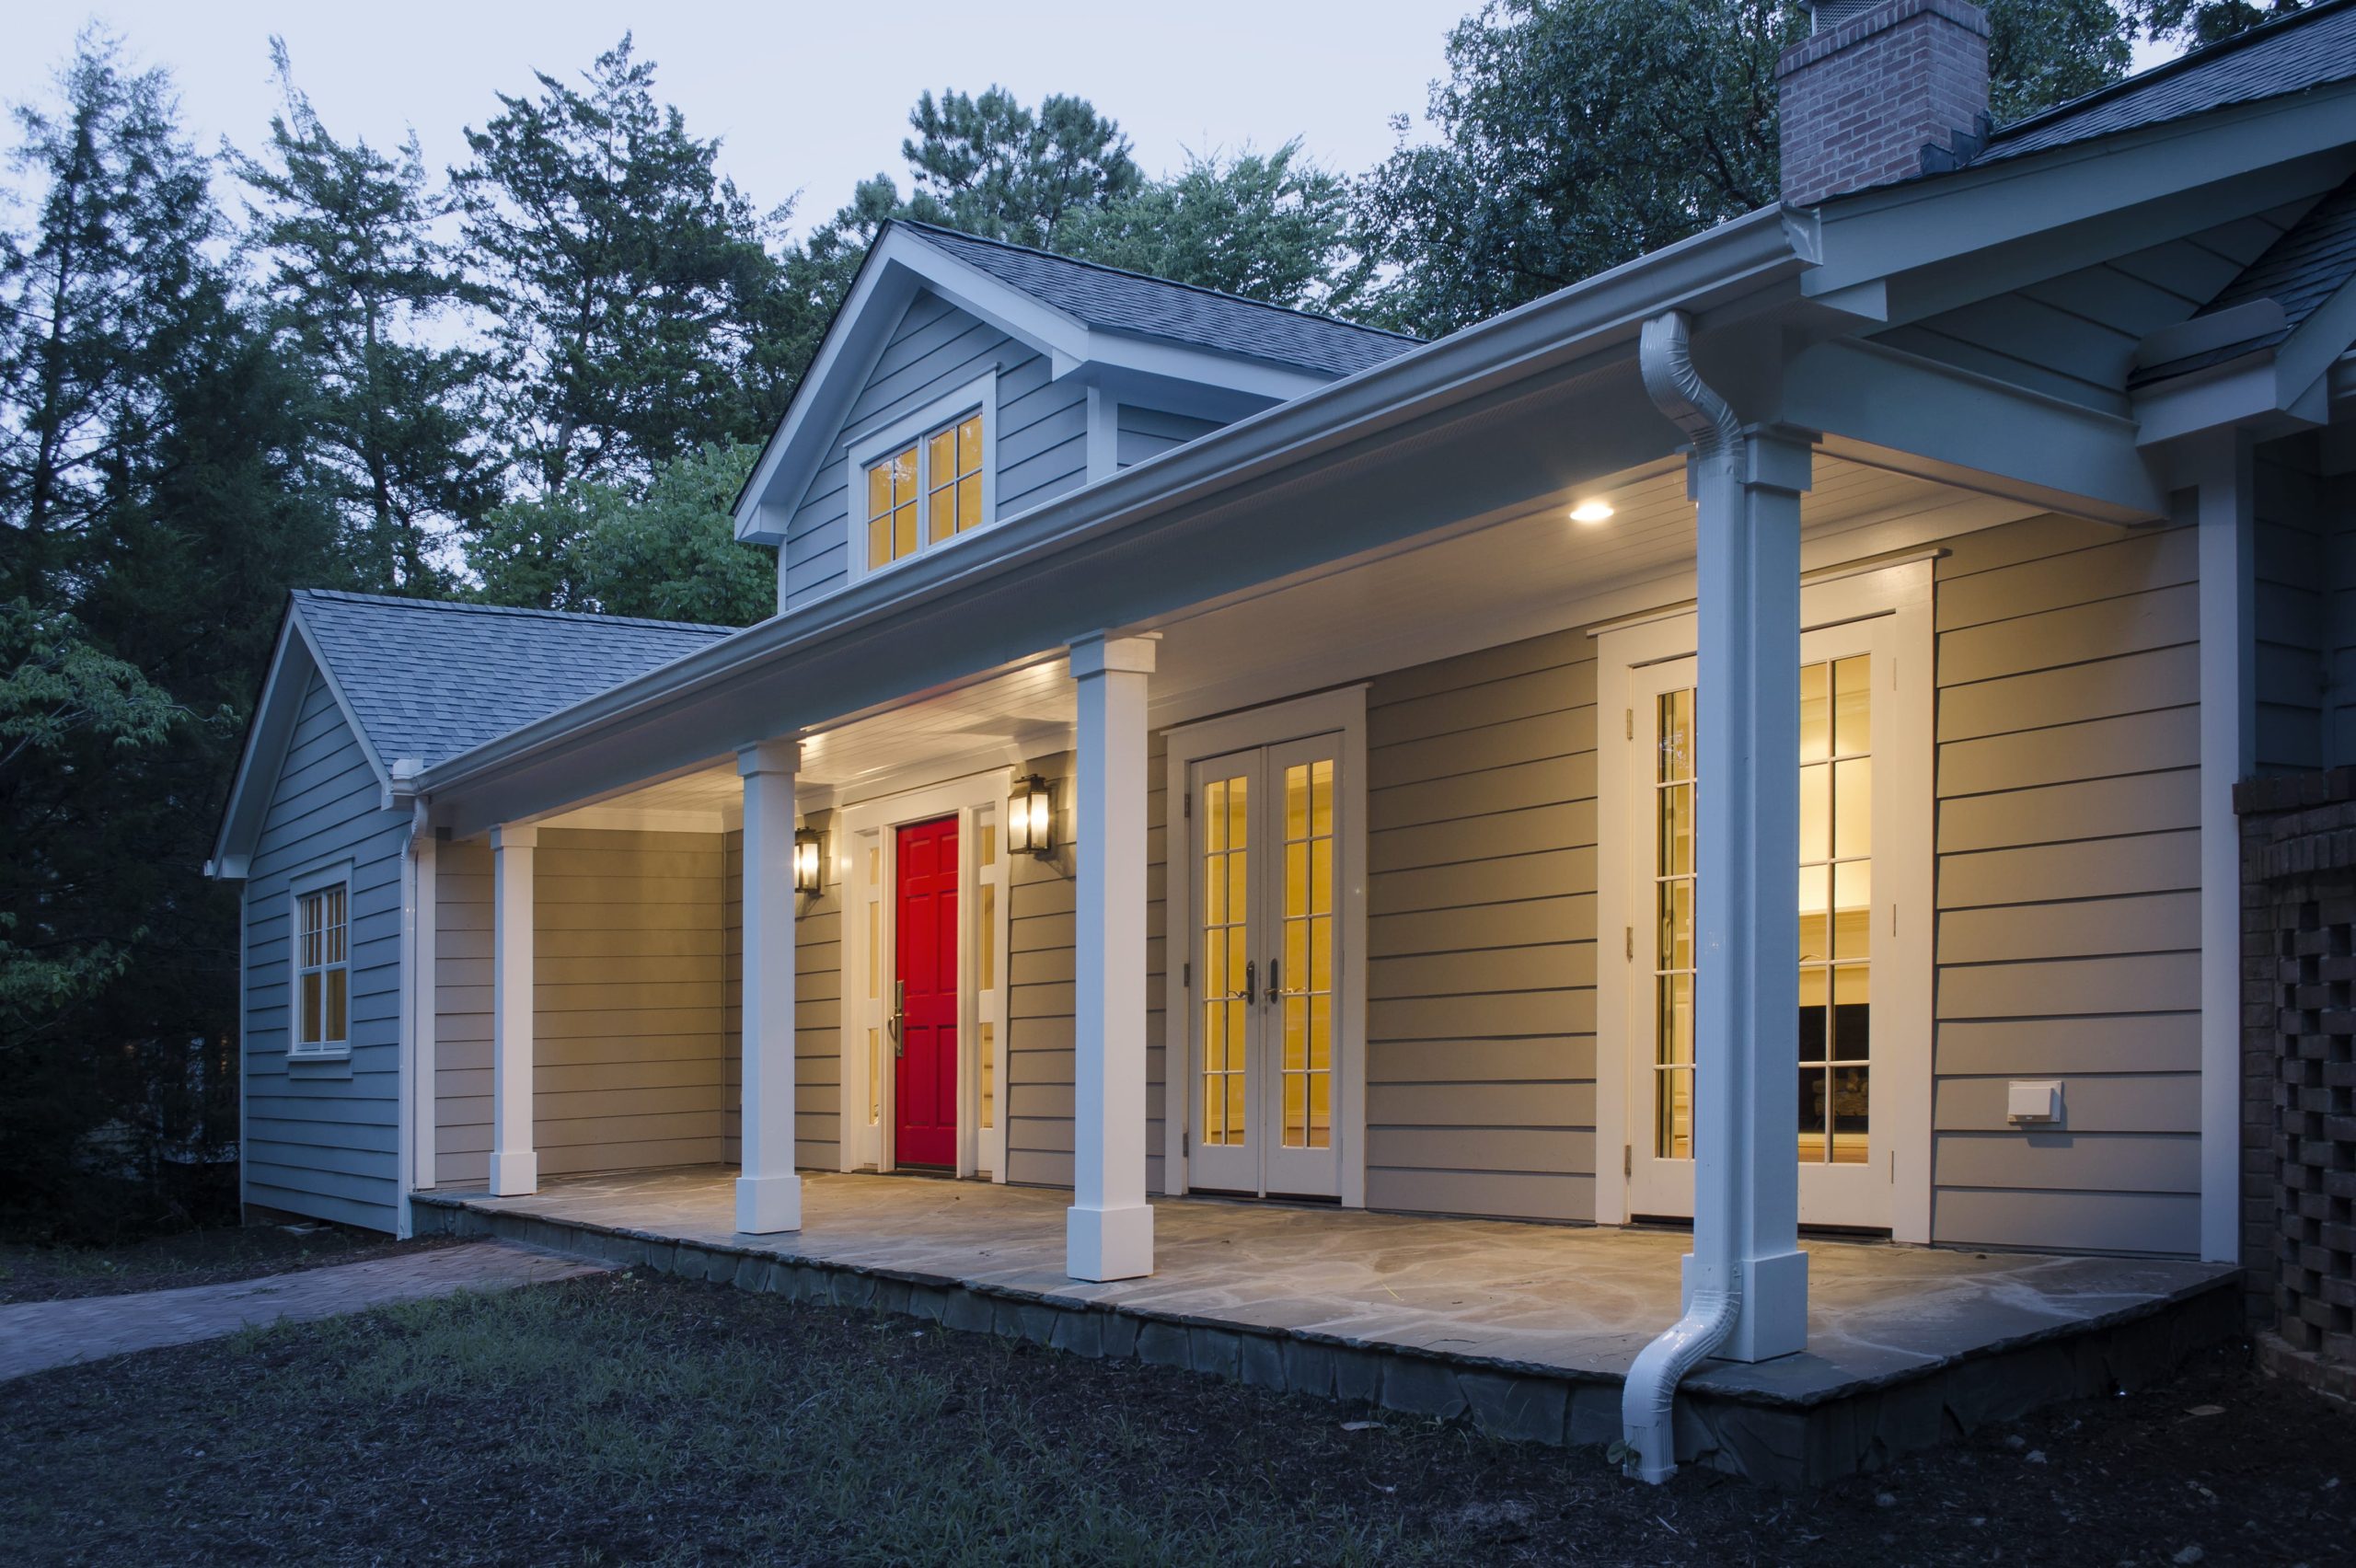 A exterior view captures the charming yet sophisticated cottage feel